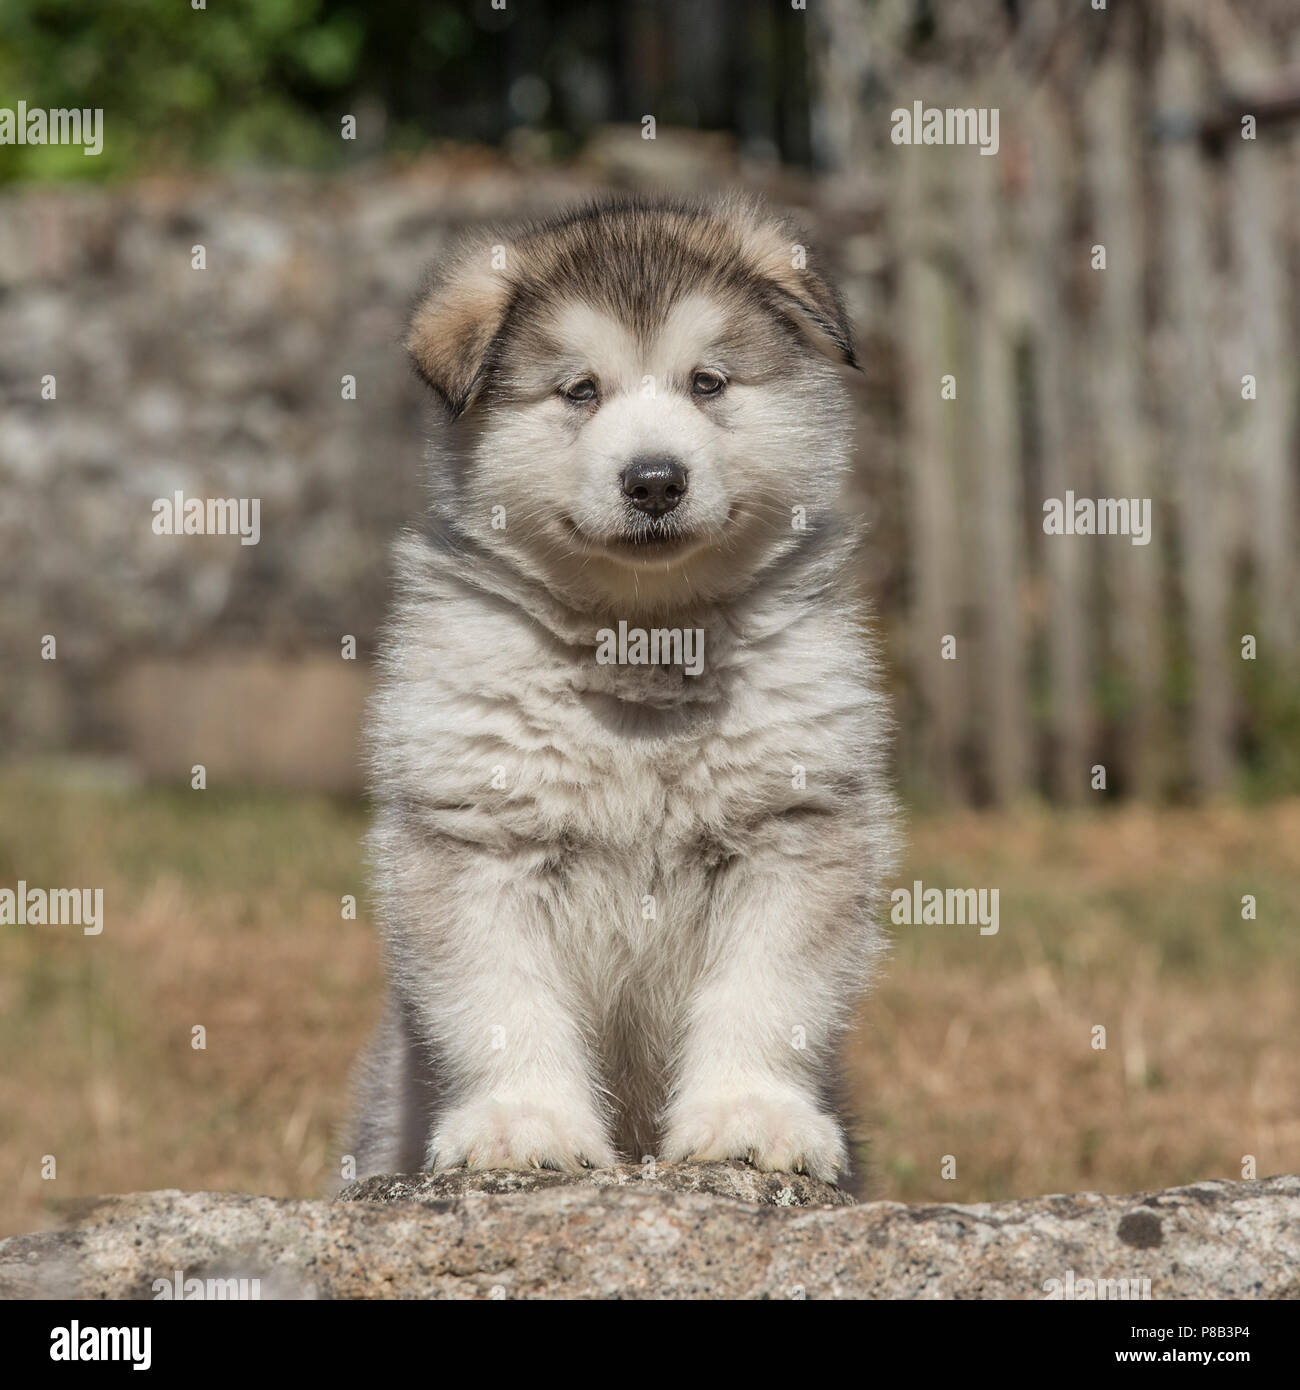 Malamute Puppy High Resolution Stock Photography and Images - Alamy